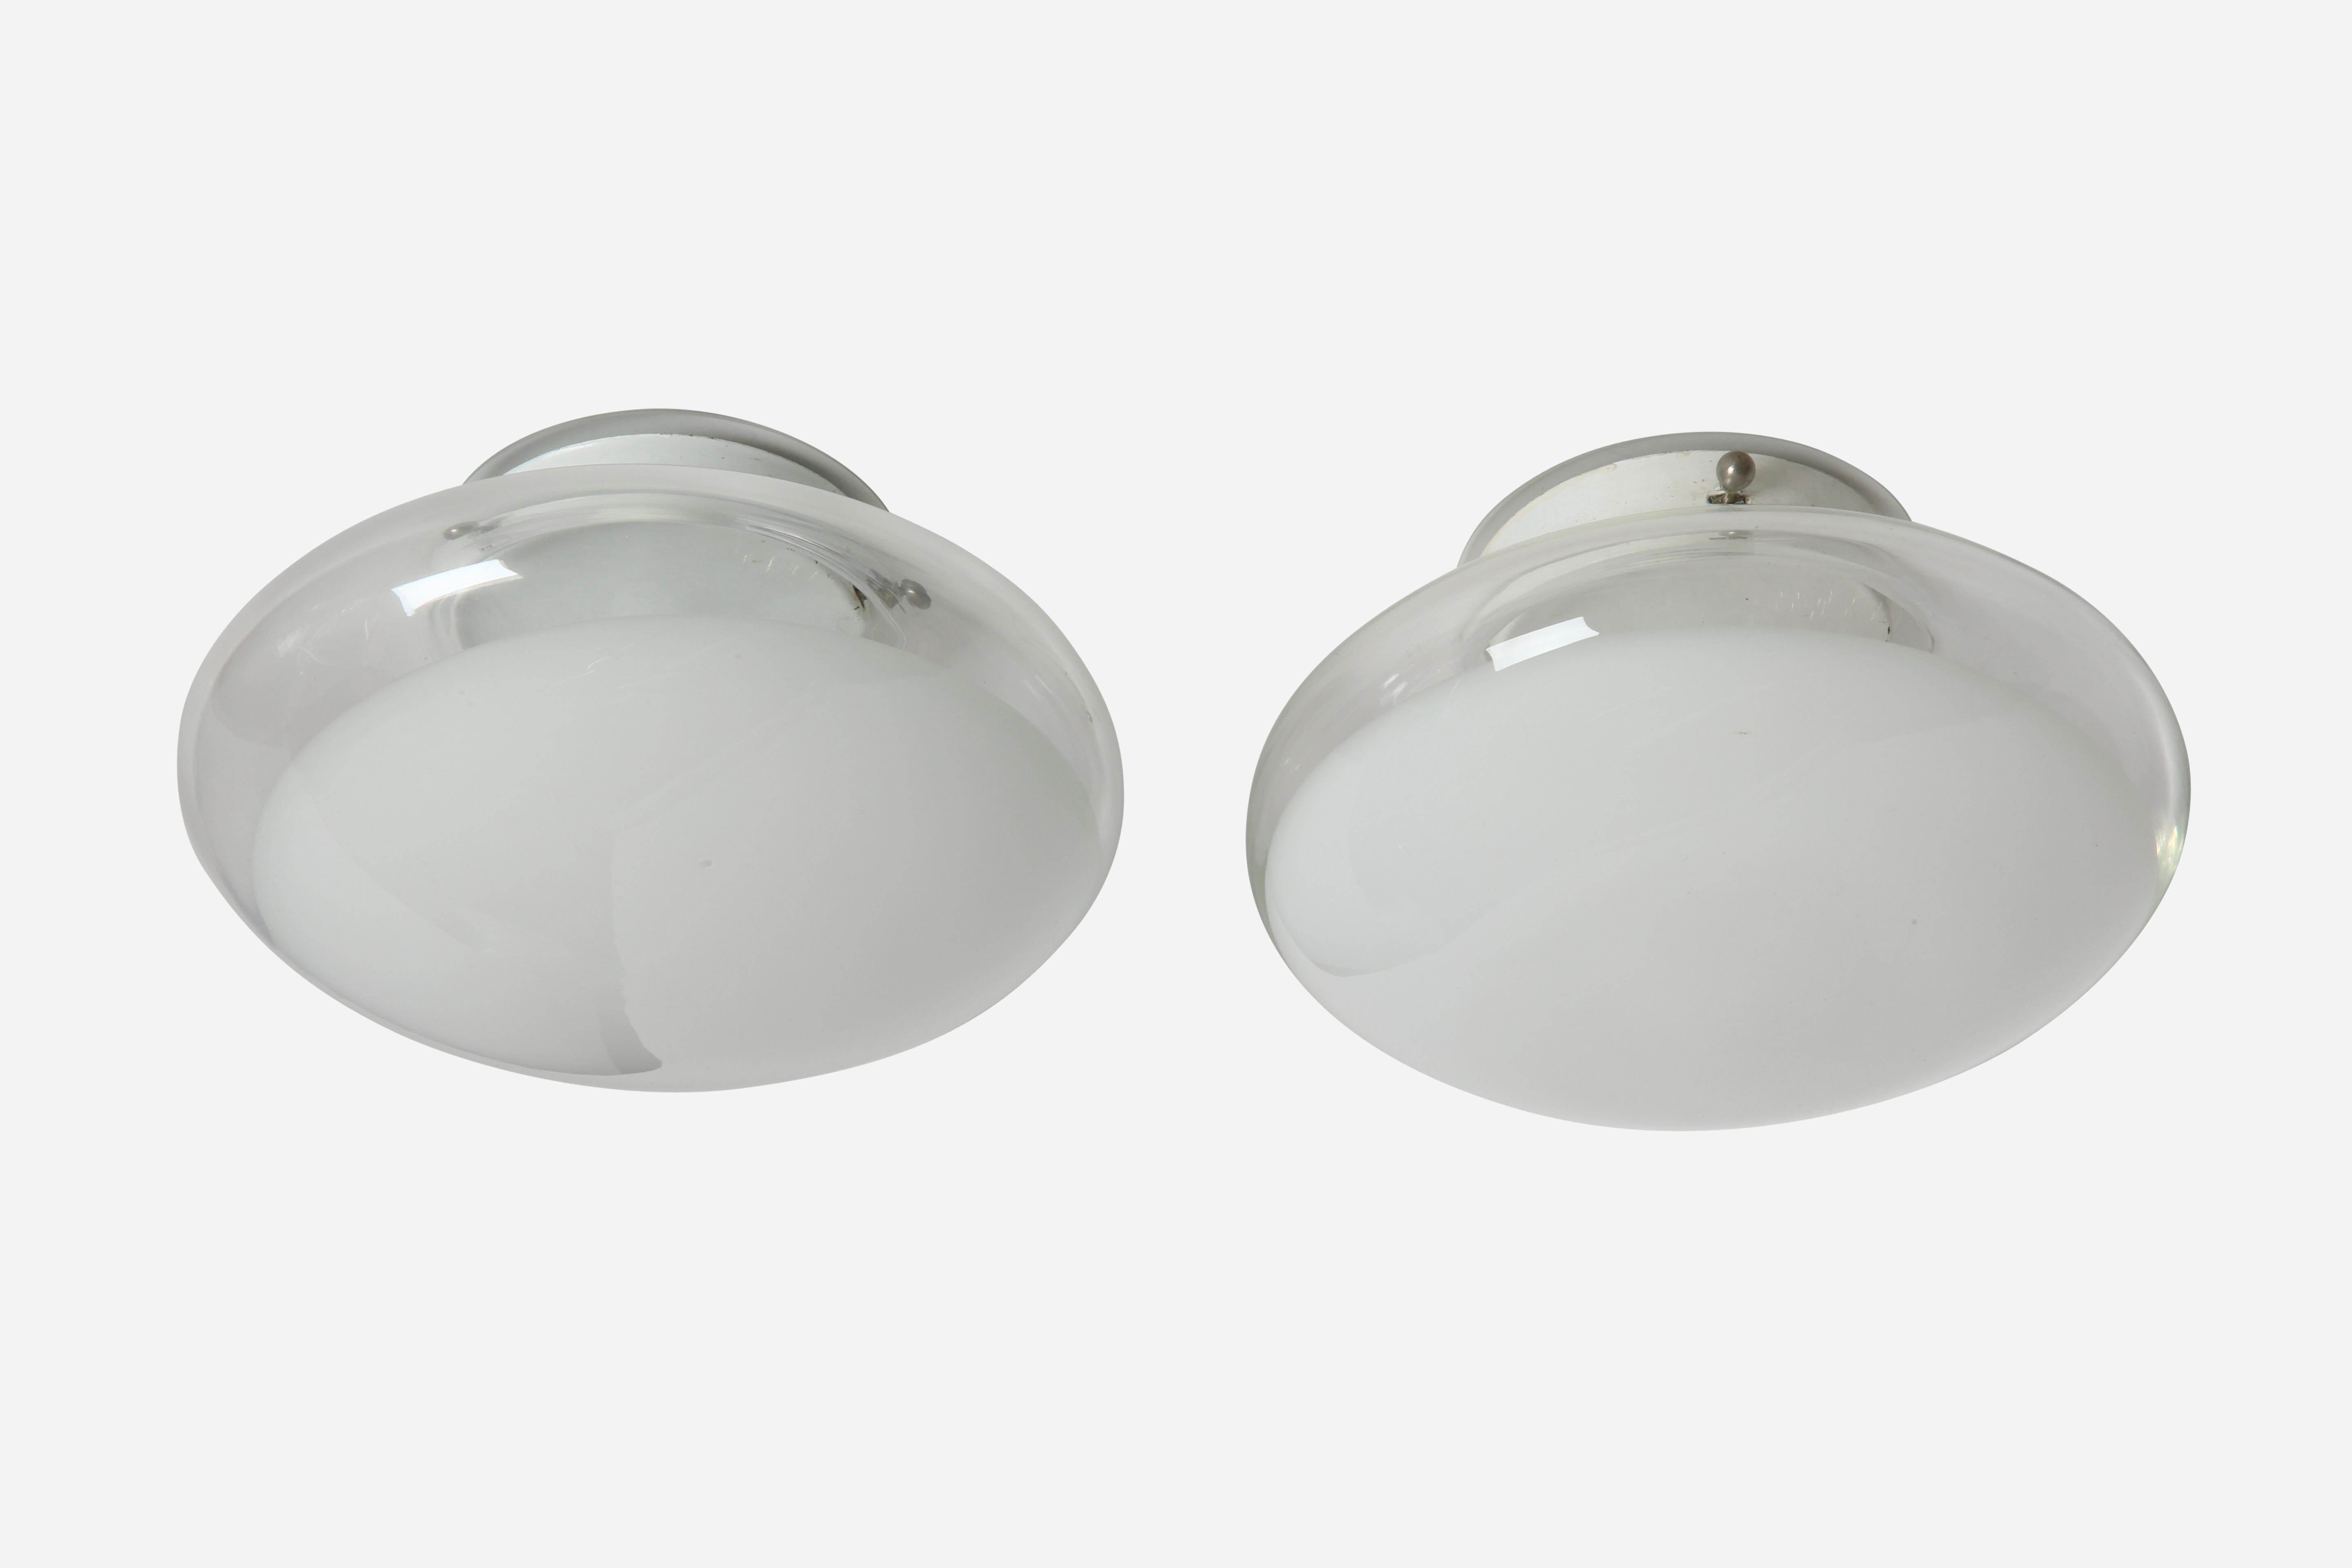 Roberto Pamio for Leucos flush mount ceiling or wall lights, a pair.
Made in Italy in 1970s
Take 1 candelabra bulb each.
Complimentary US rewiring upon request.
Price is for the pair.

We take pride in bringing vintage fixtures to their full glory